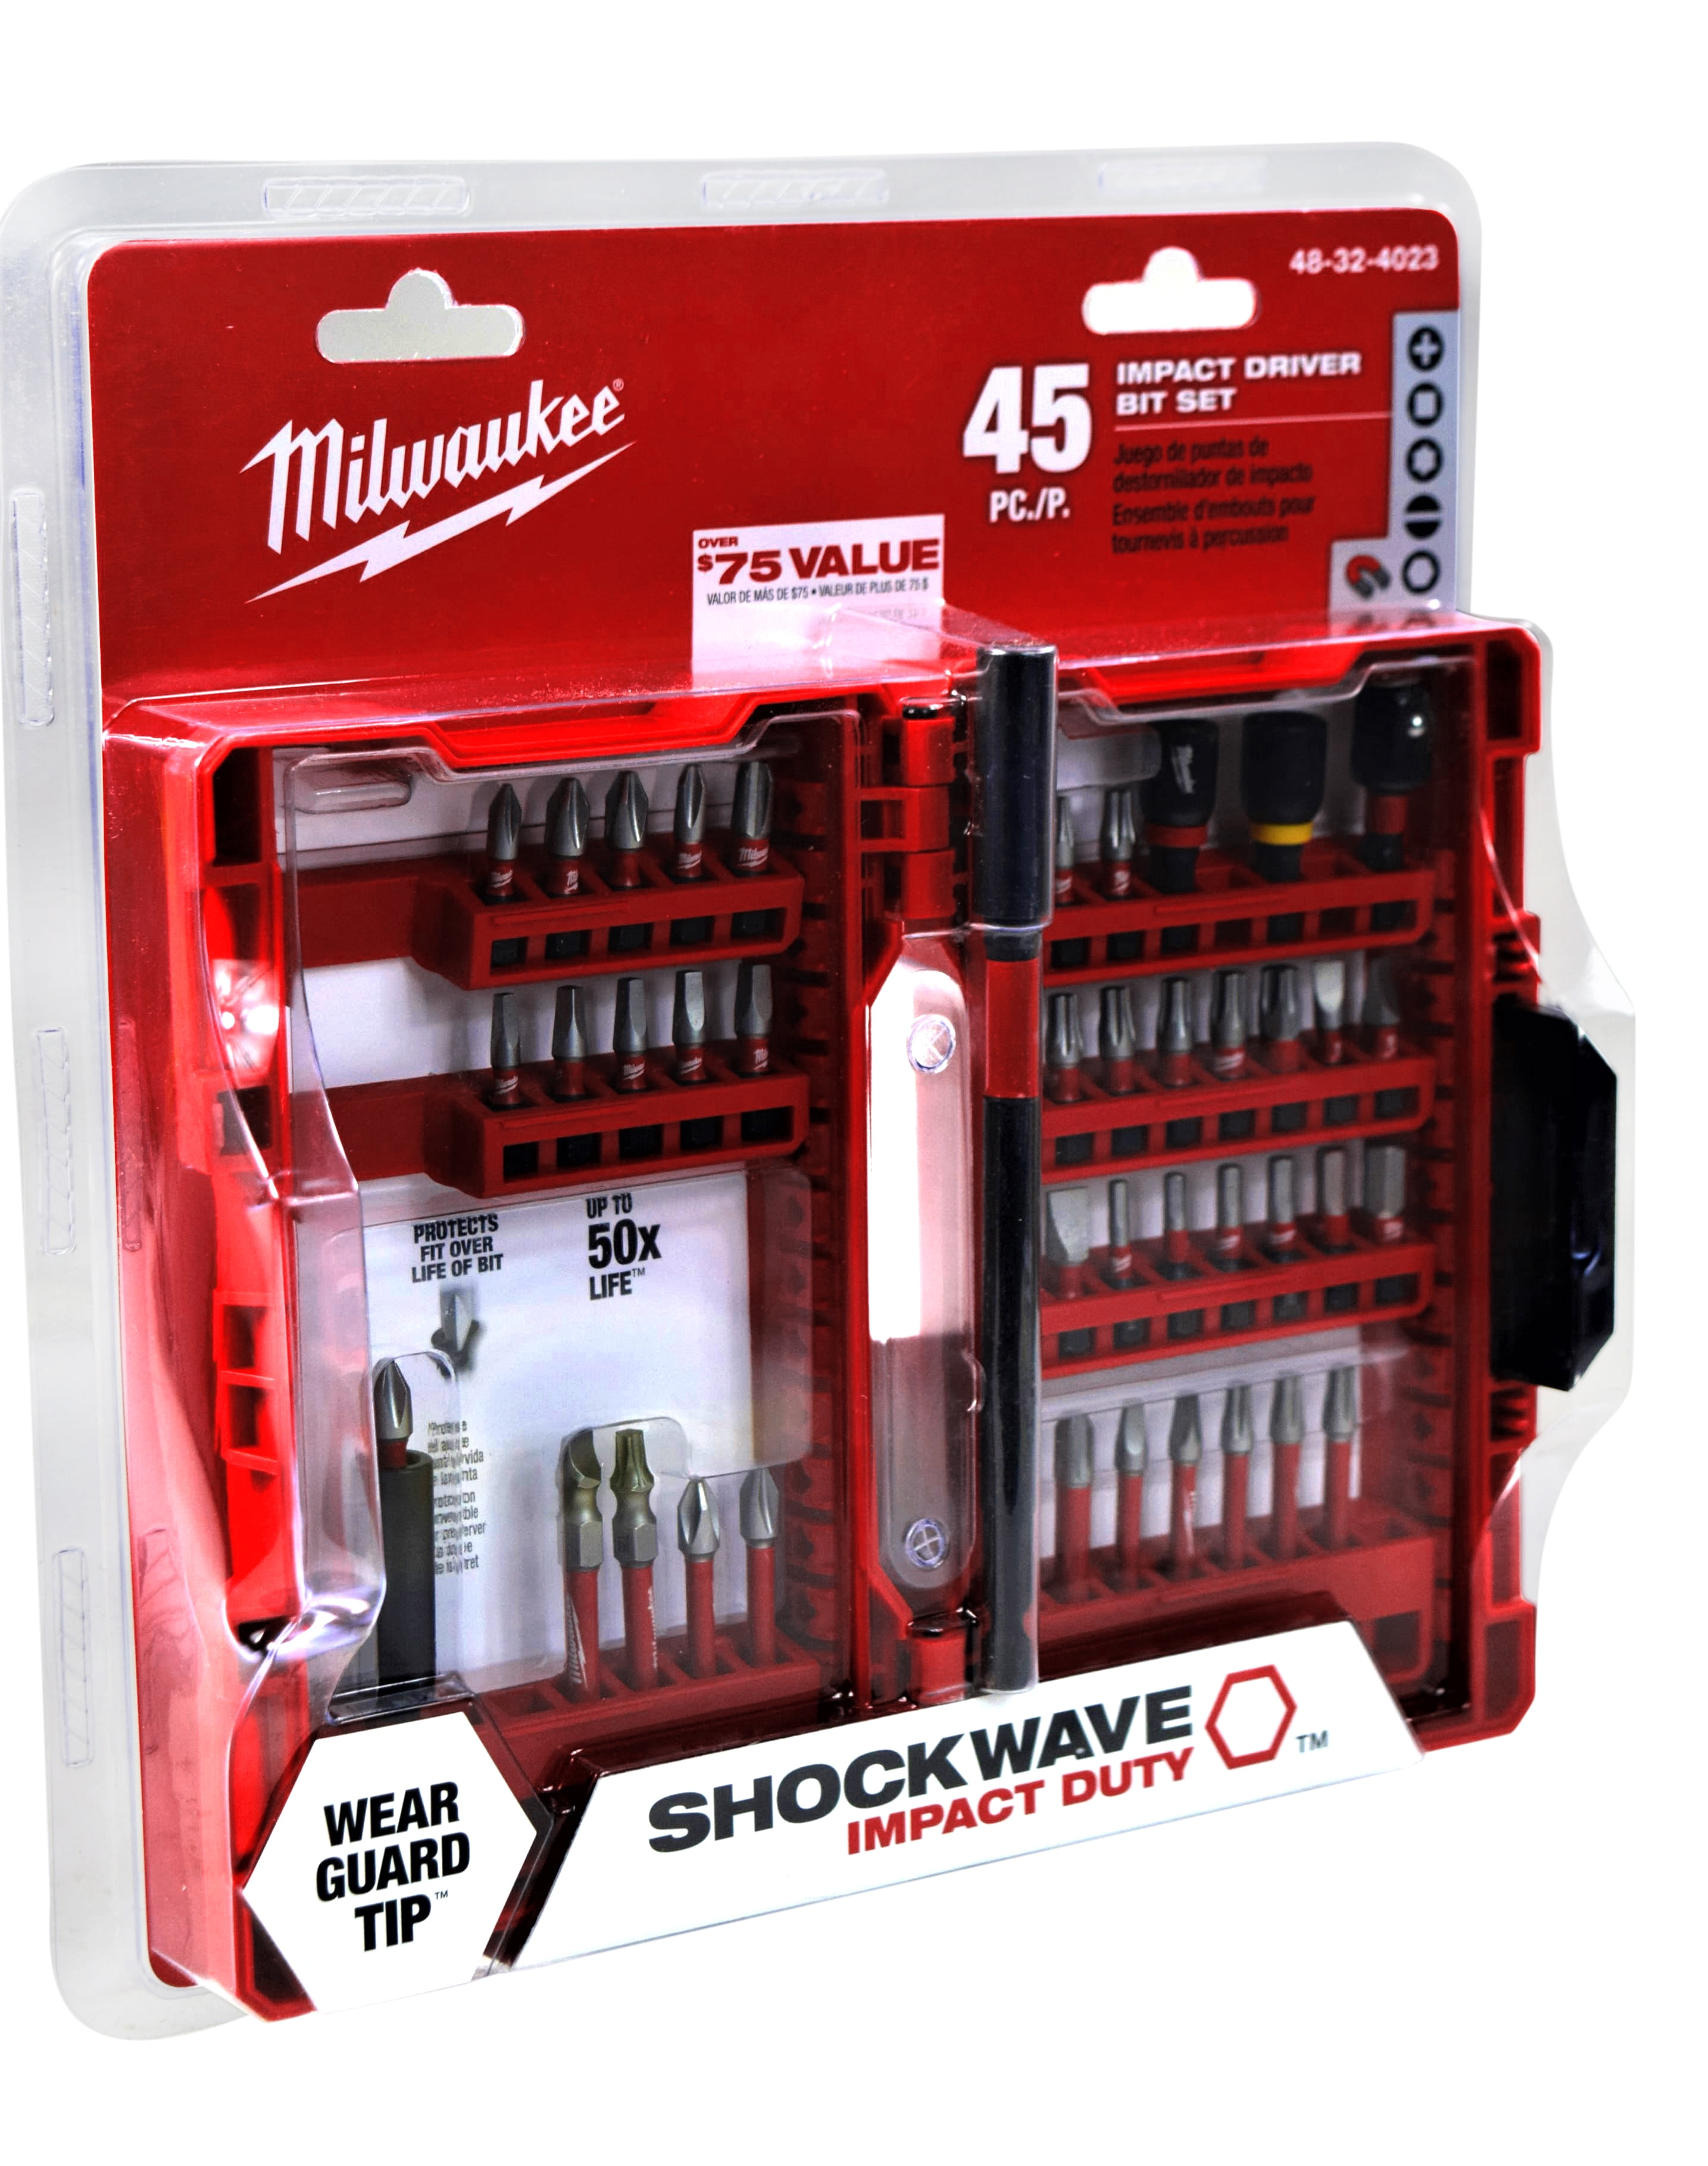 SHOCKWAVE IMPACT DUTY Drill and Driver Bit Set 50-Piece 